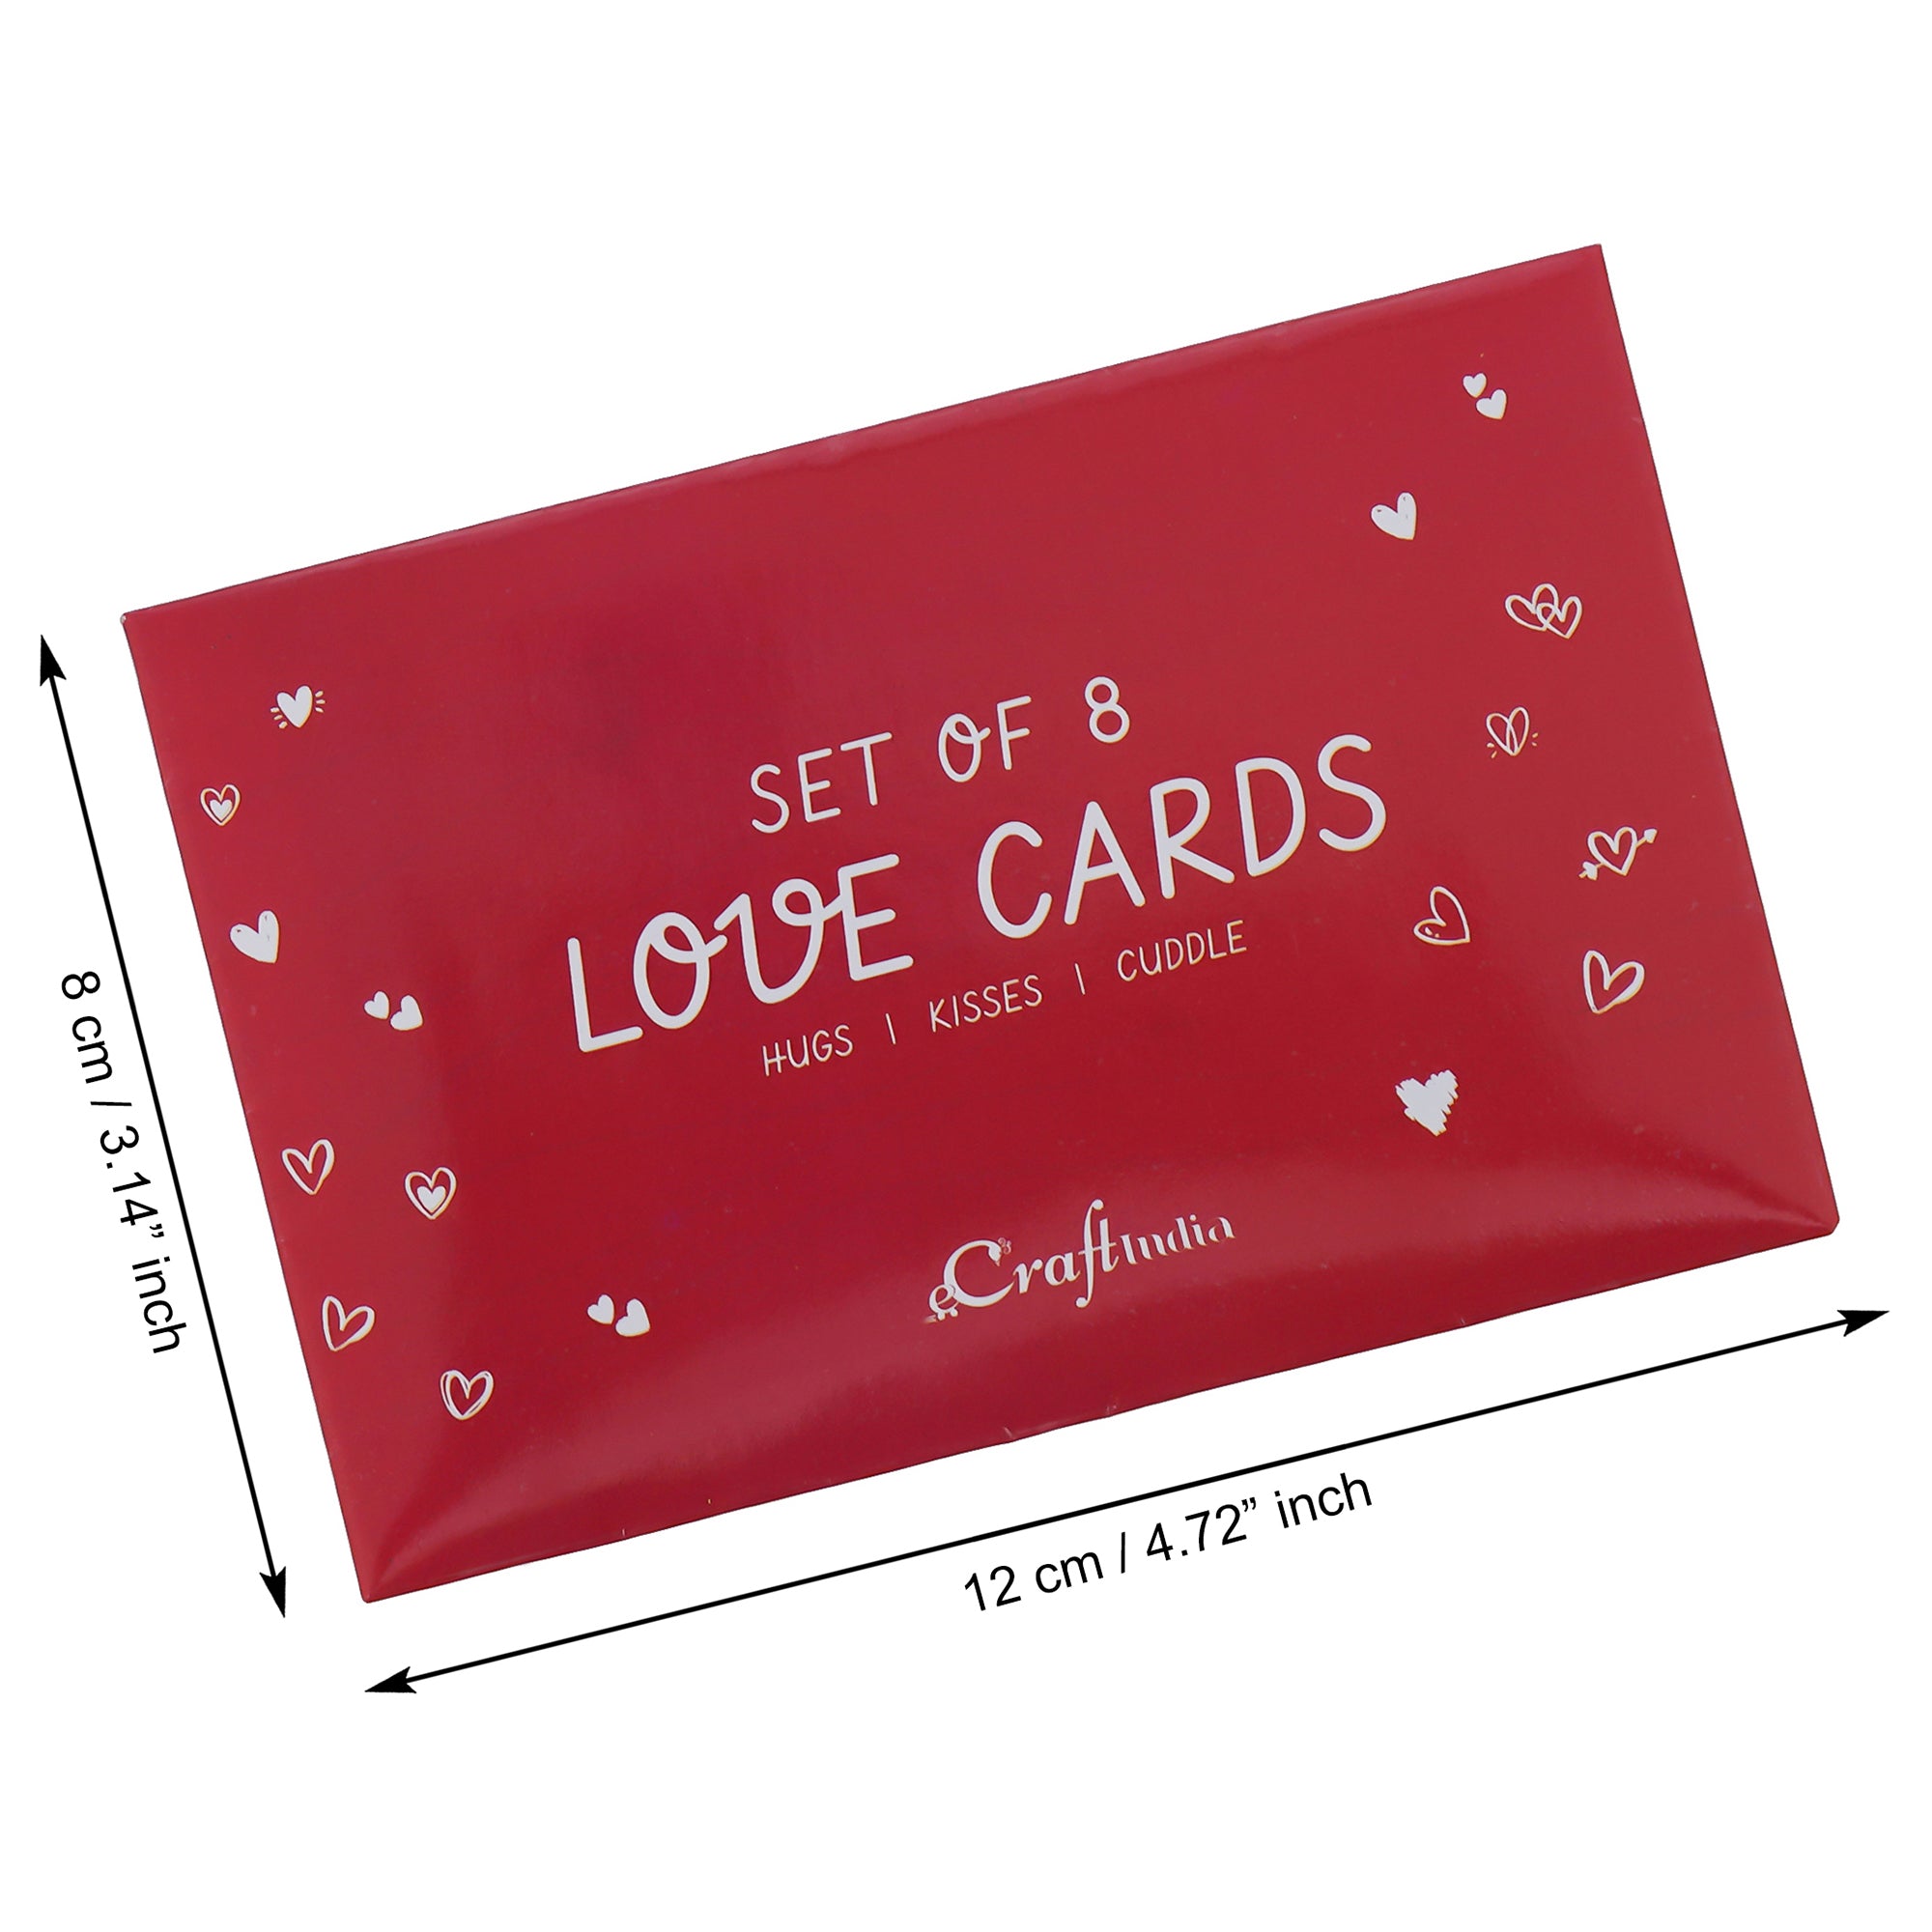 Valentine Combo of Pack of 8 Love Gift Cards, Red Gift Box with Teddy & Roses, Red and White Heart Hugging Each Other Gift Set 2